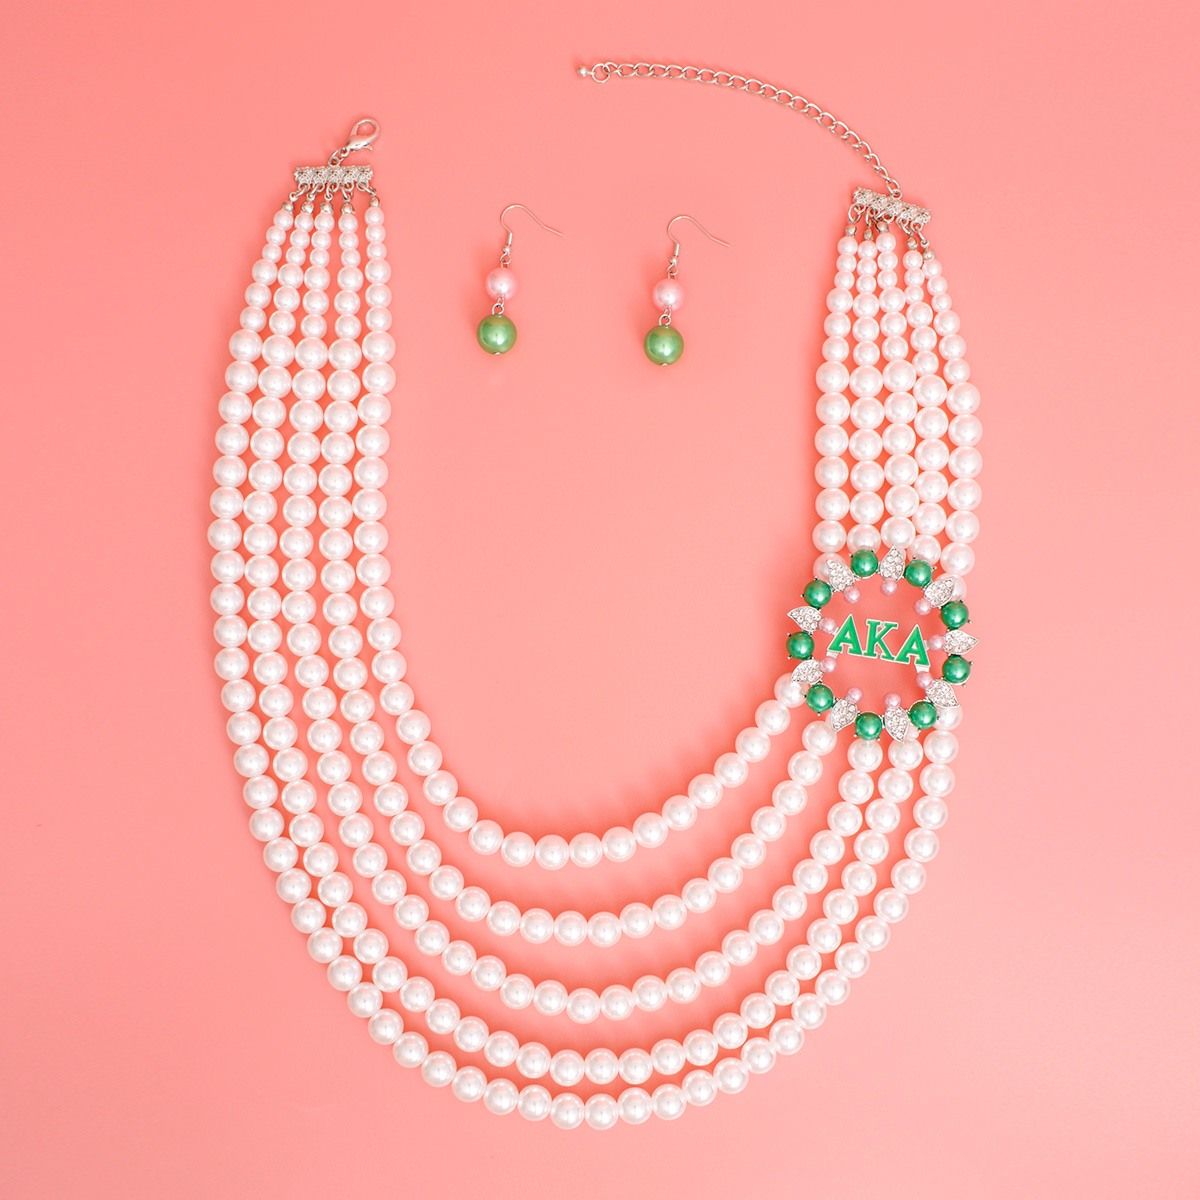 Necklace White Pearl AKA Set for Women